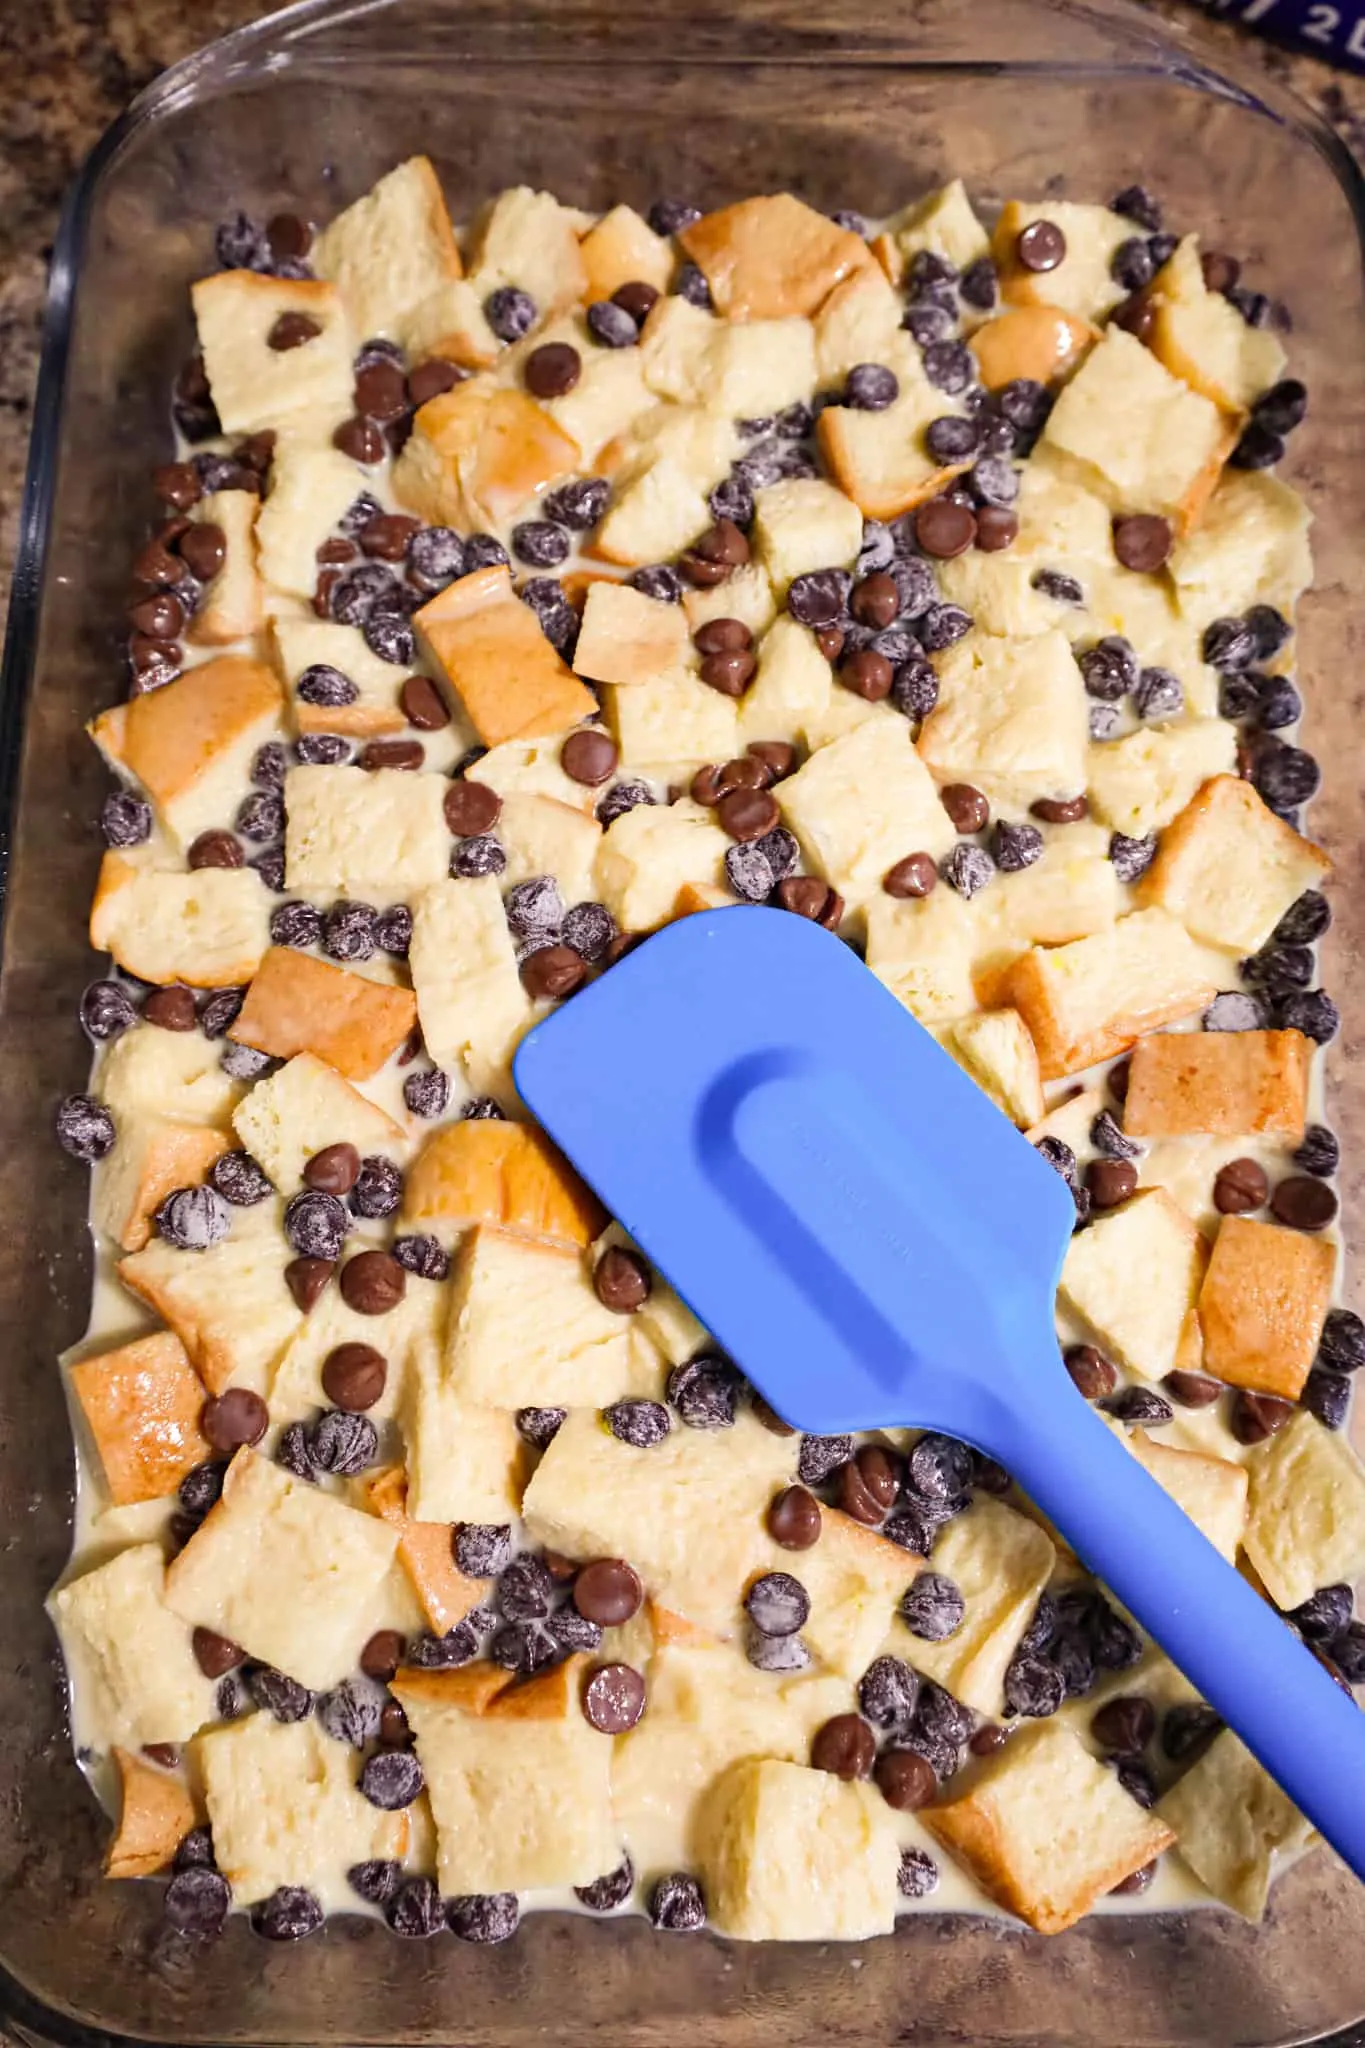 bread pudding in a baking dish before baking